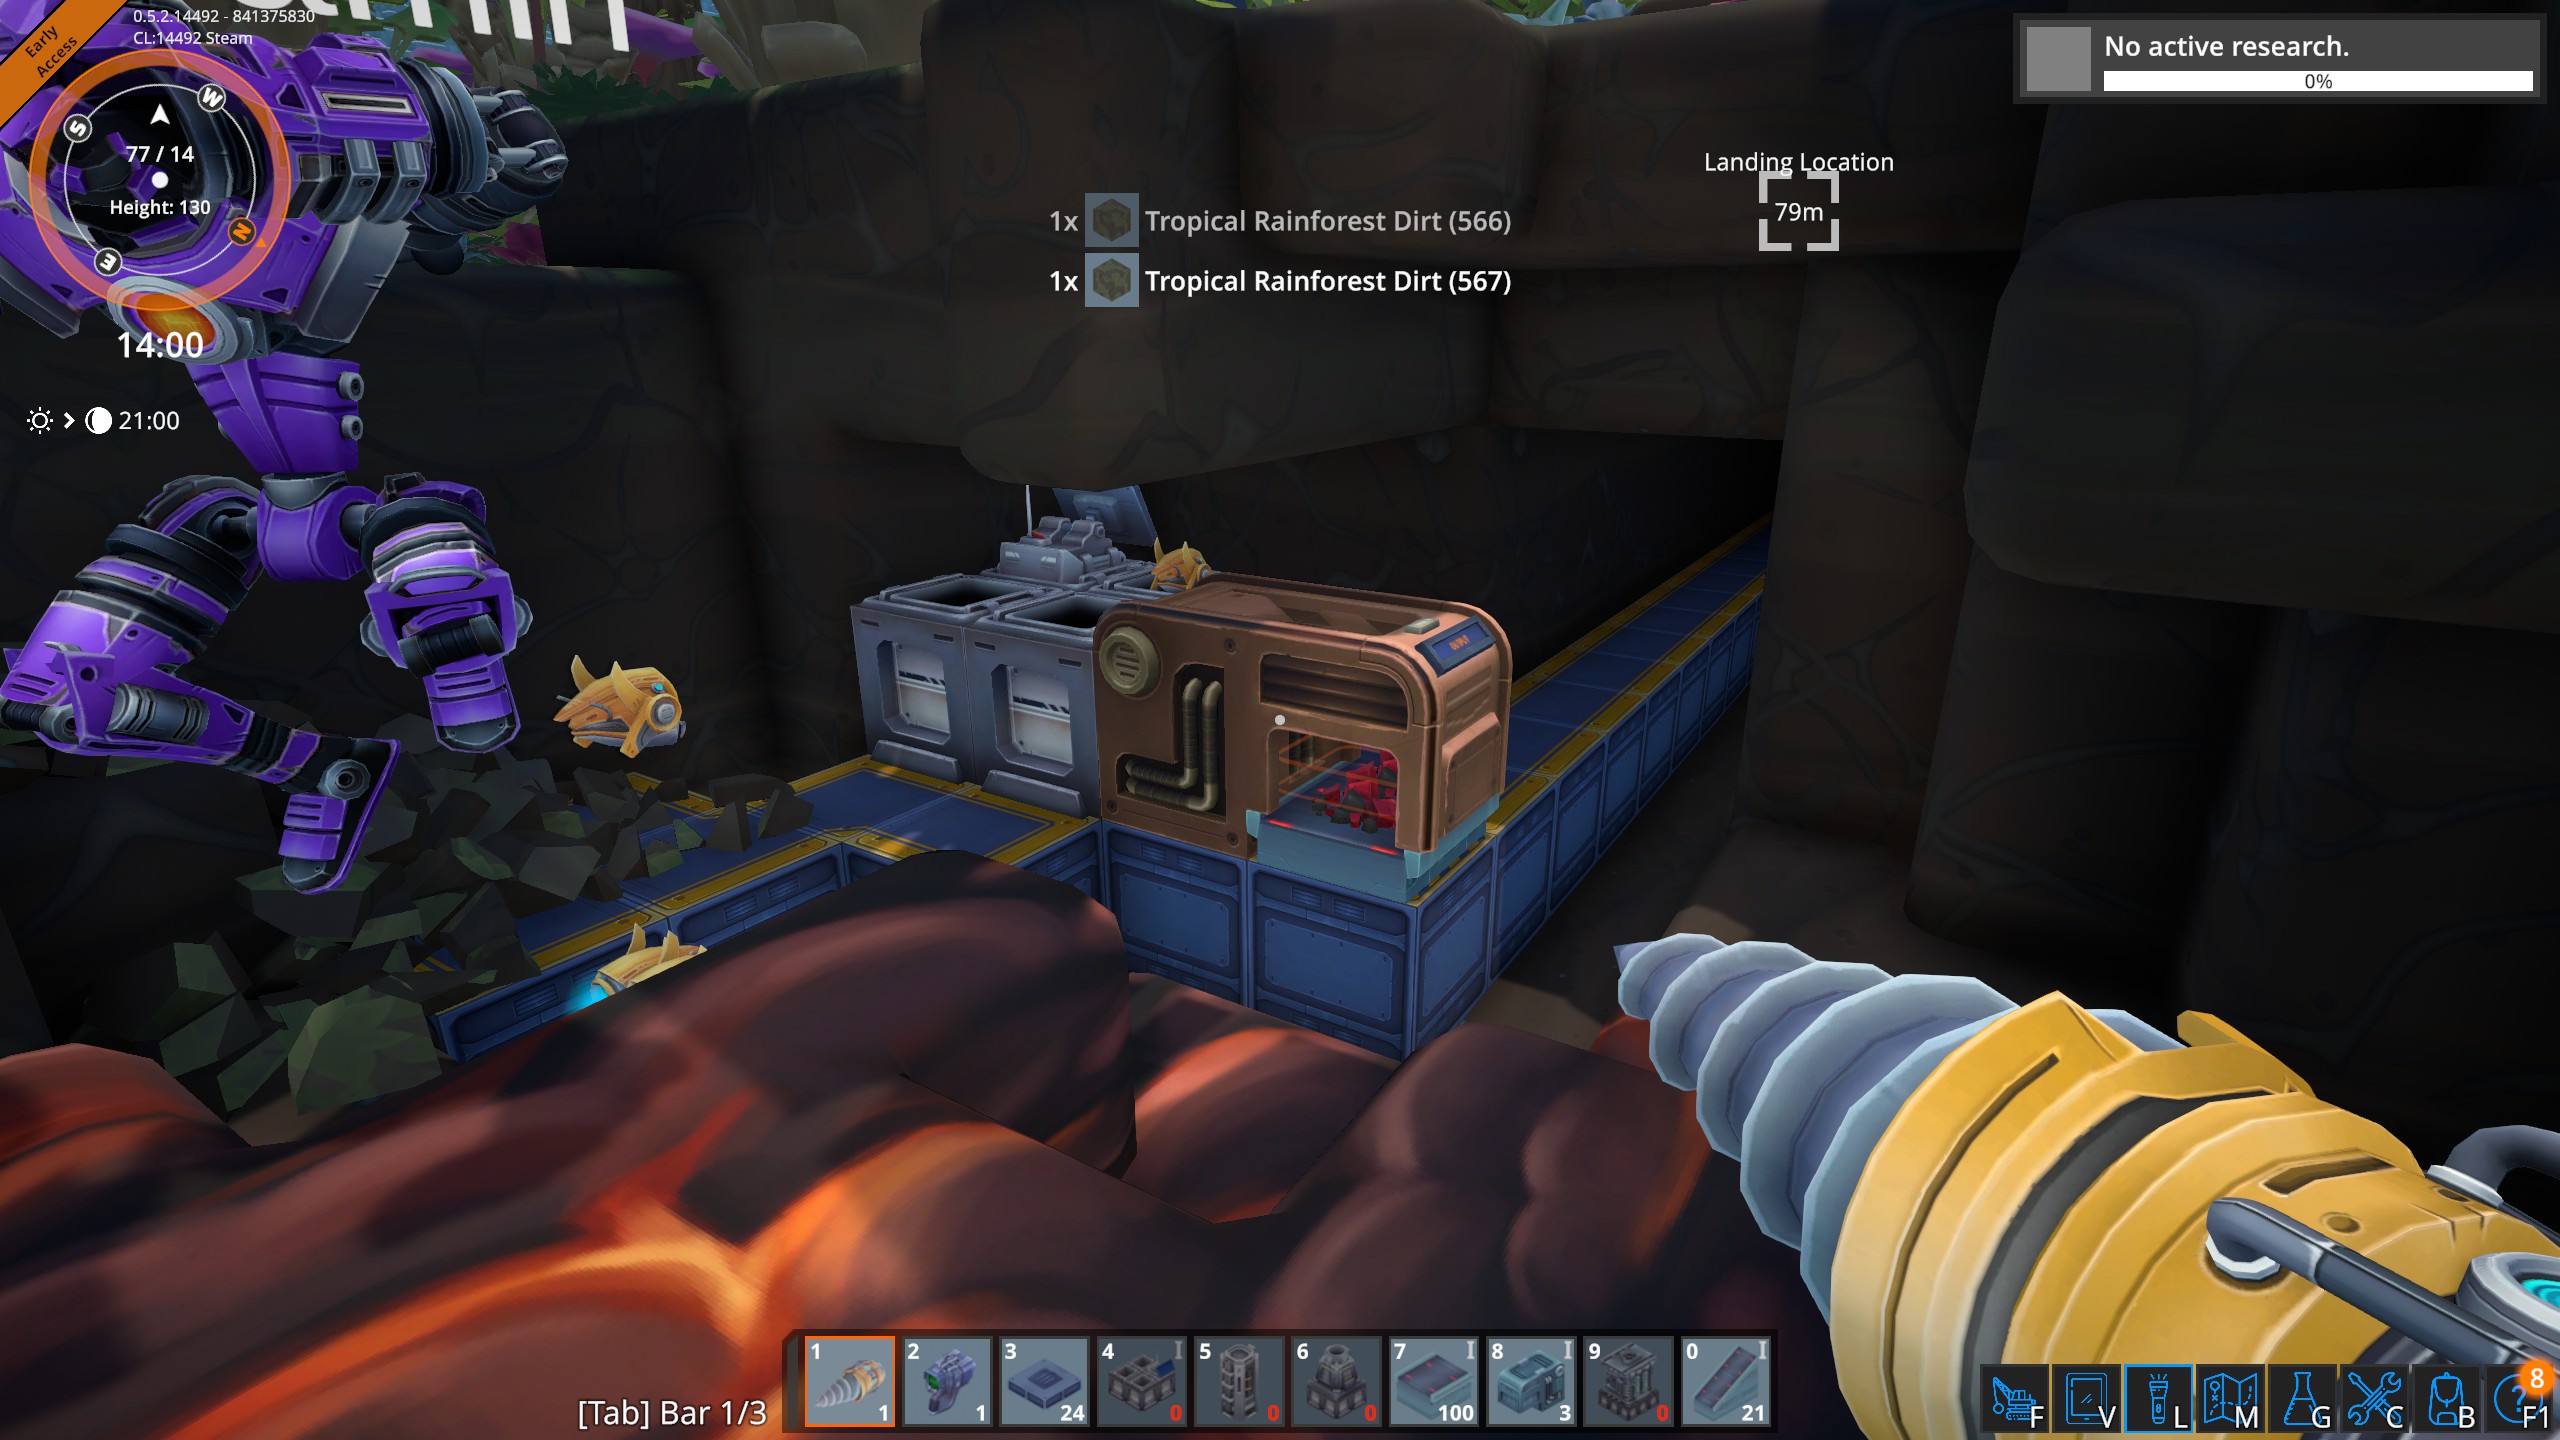 Foundry base building